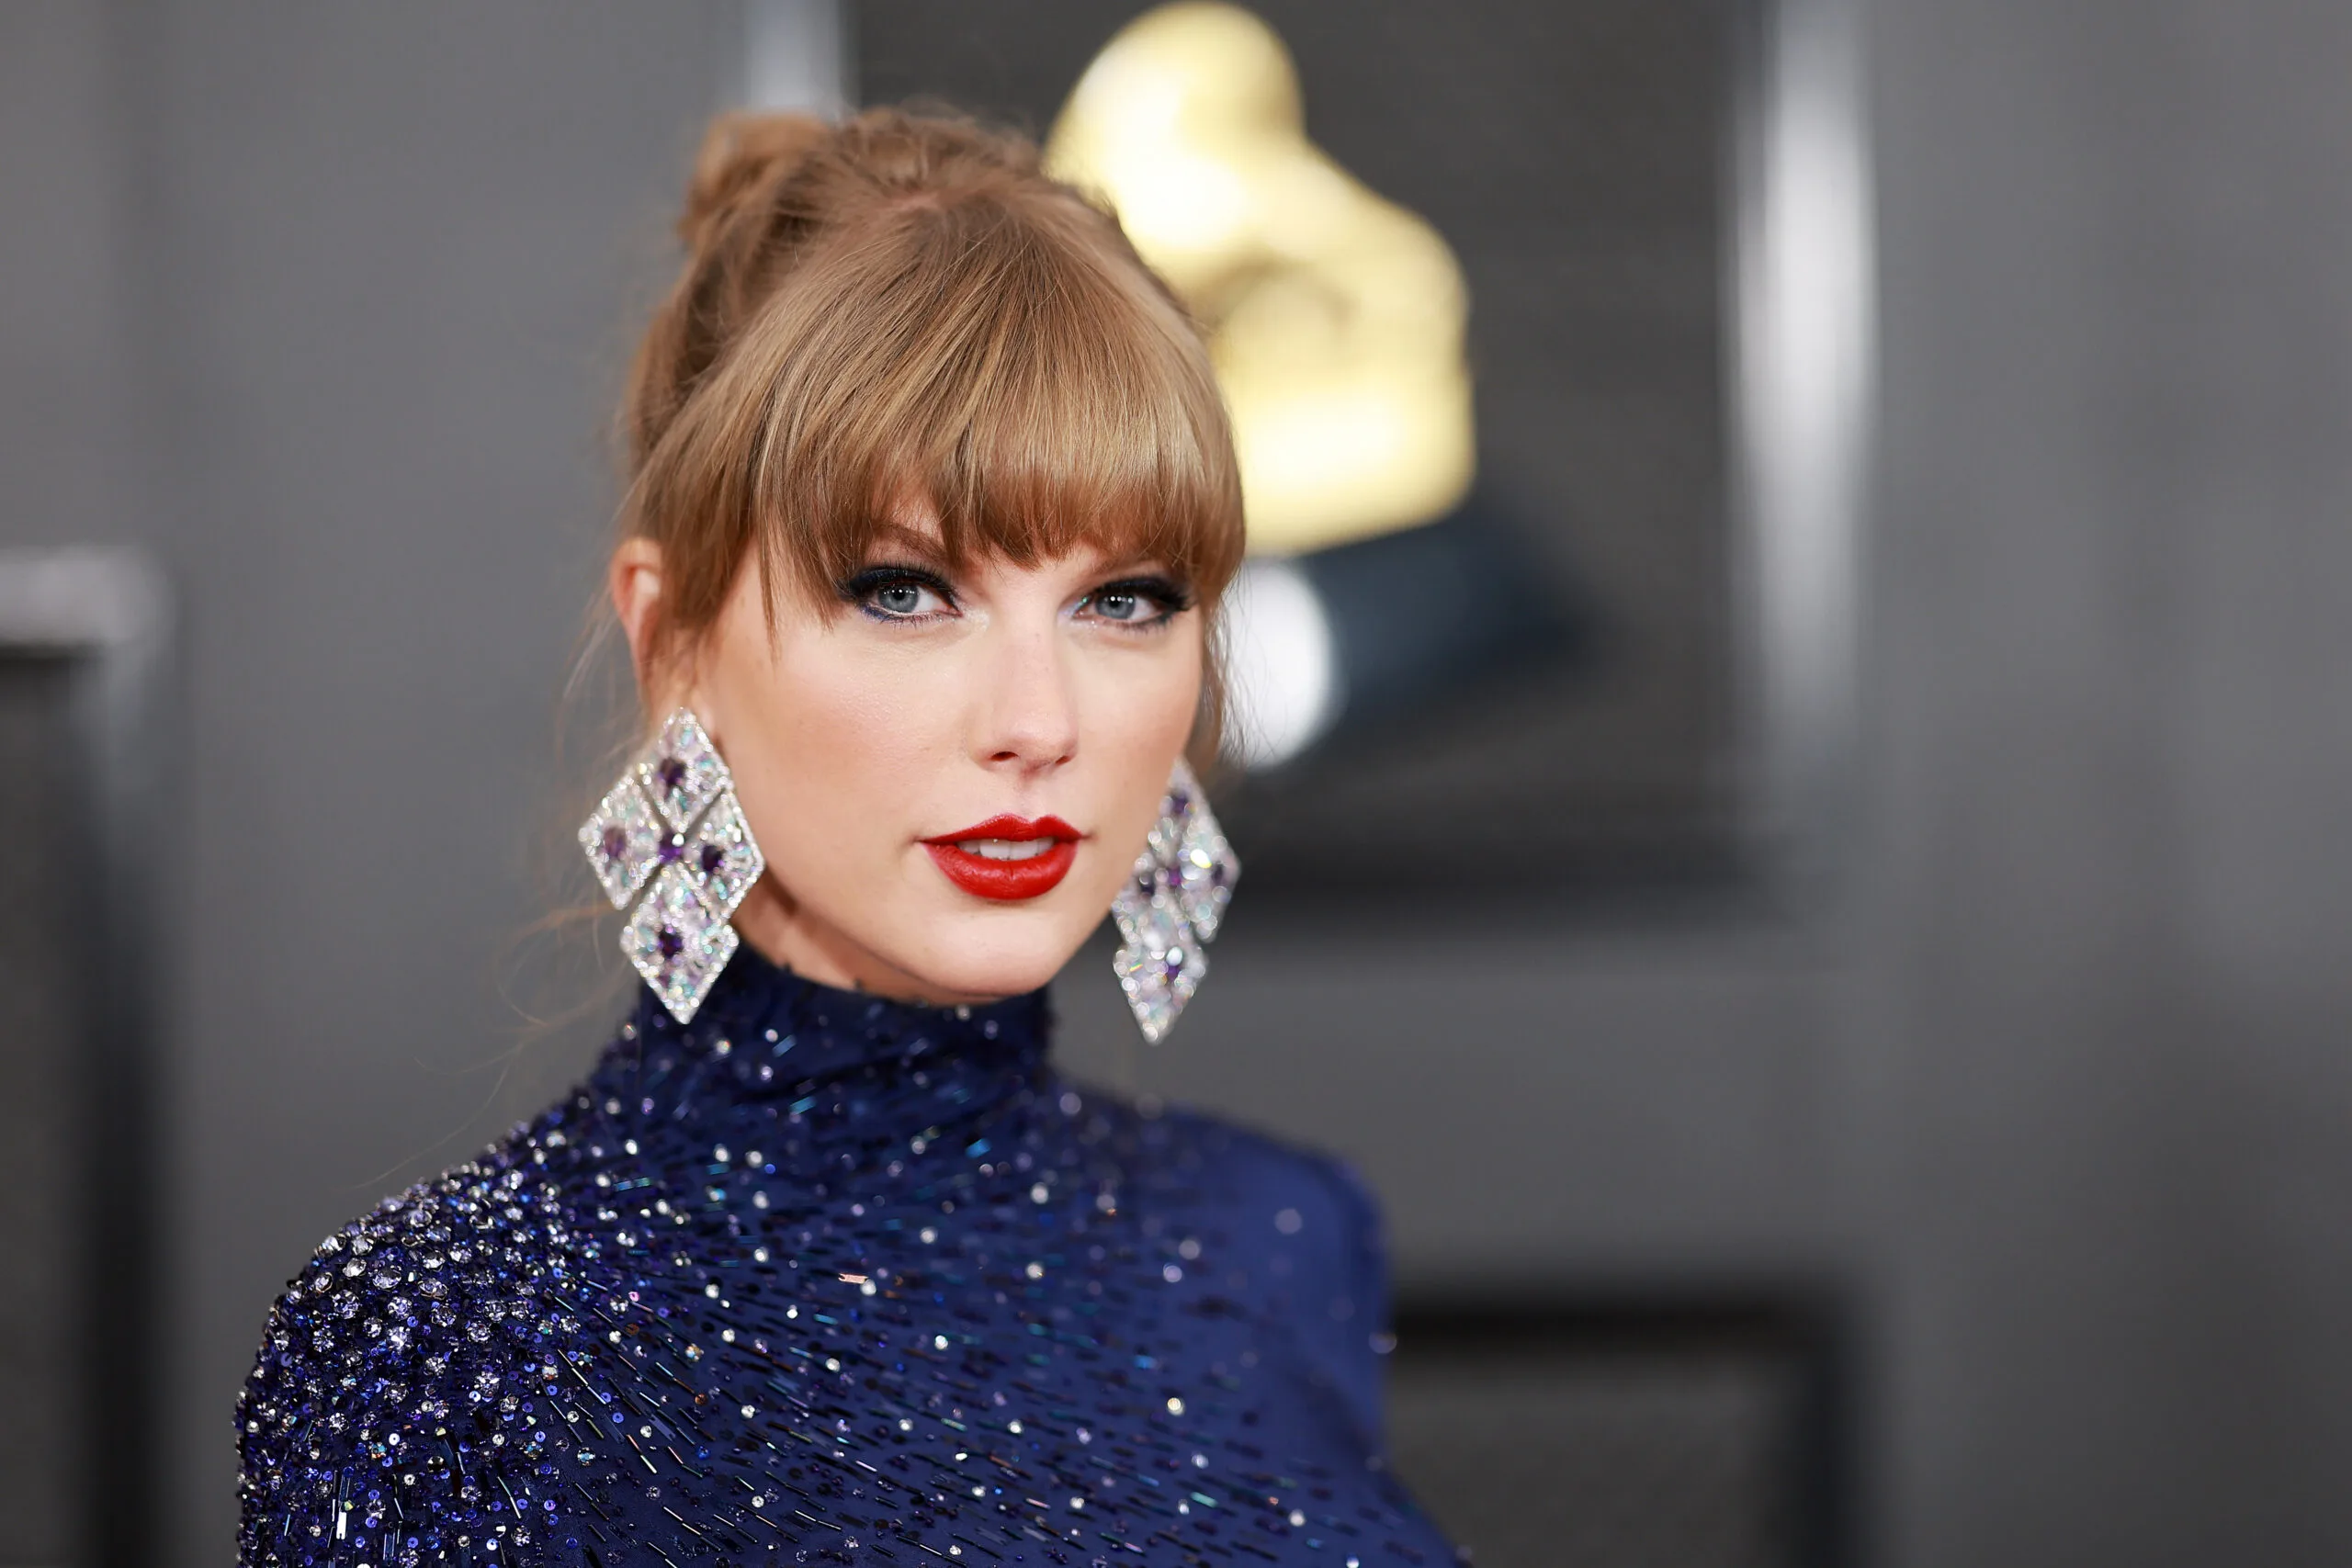 LOS ANGELES, CALIFORNIA - FEBRUARY 05: Taylor Swift attends the 65th GRAMMY Awards on February 05, 2023 in Los Angeles, California. (Photo by Matt Winkelmeyer/Getty Images for The Recording Academy)